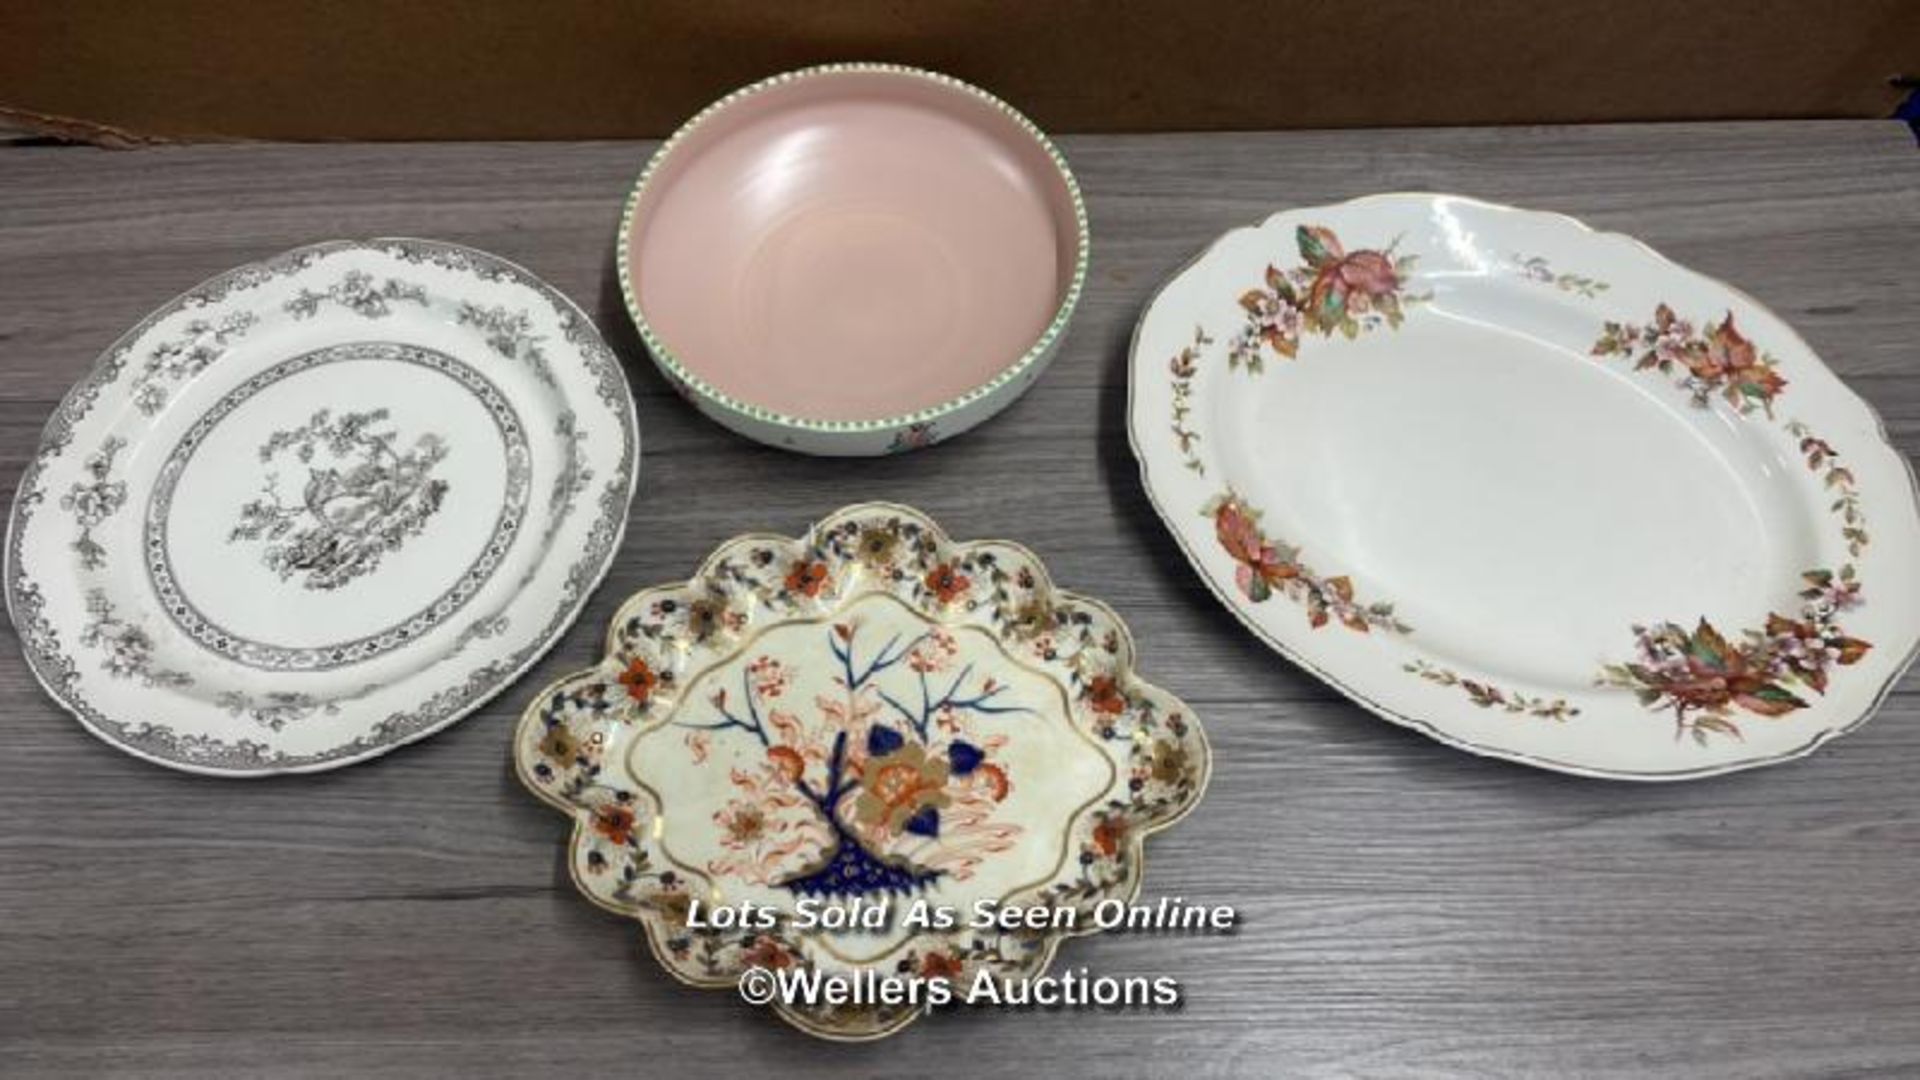 THREE LARGE PLATTERS INCLUDING DERBY DEWSBURY C1790, ROYAL DAULTON WILTON AND SPODE WITH A POOL